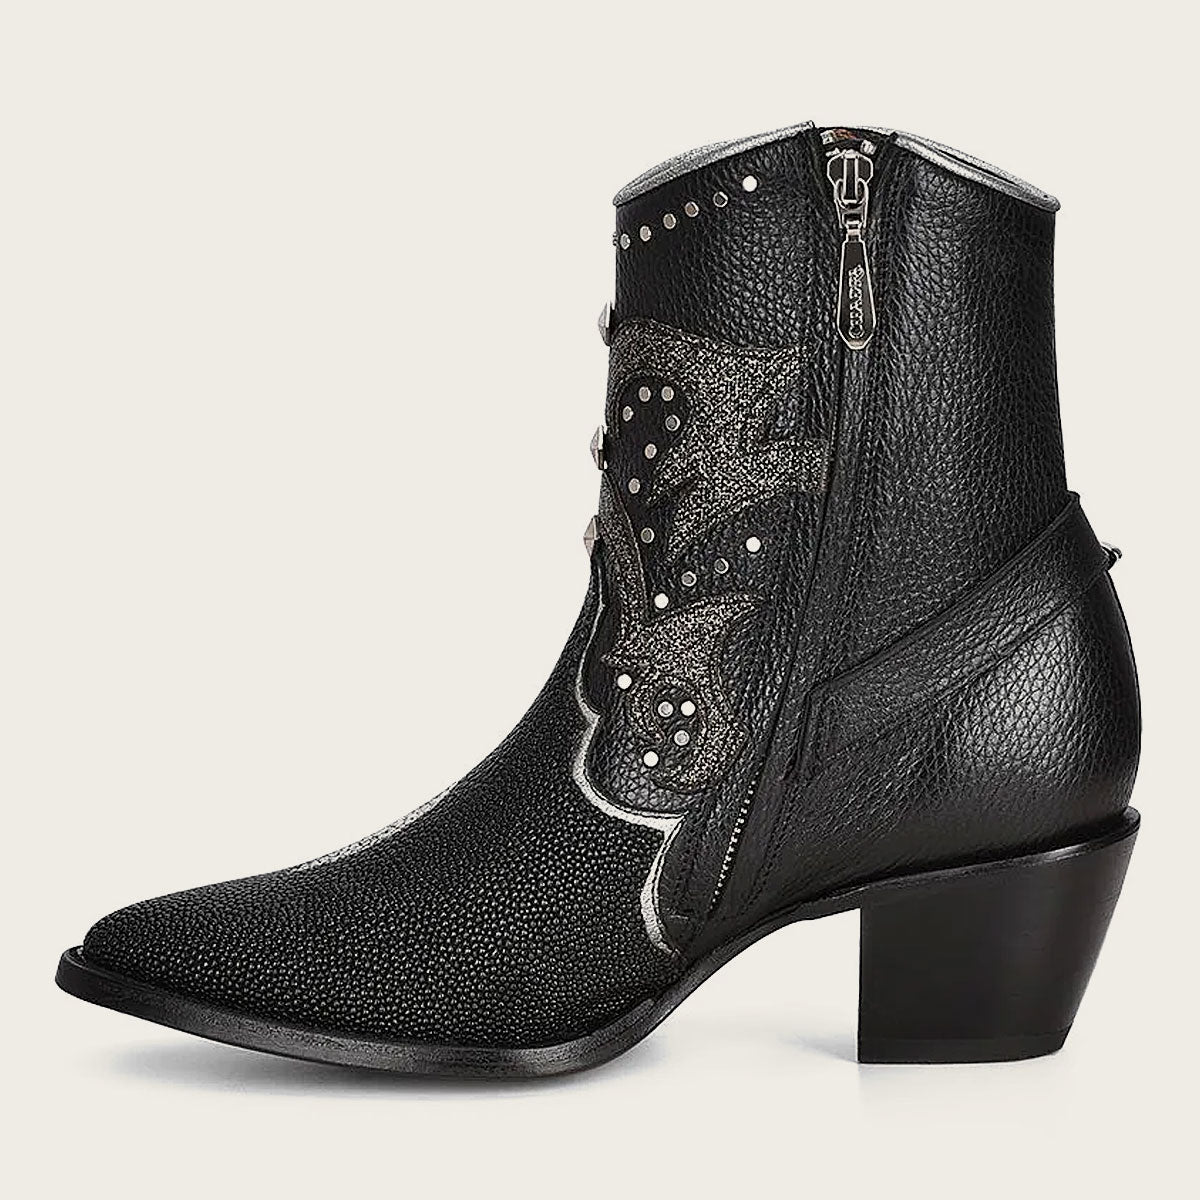 Black western exotic leather bootie - high-quality leather with intricate detailing and a modern twist on a classic Western design. Versatile and comfortable, perfect for any occasion.